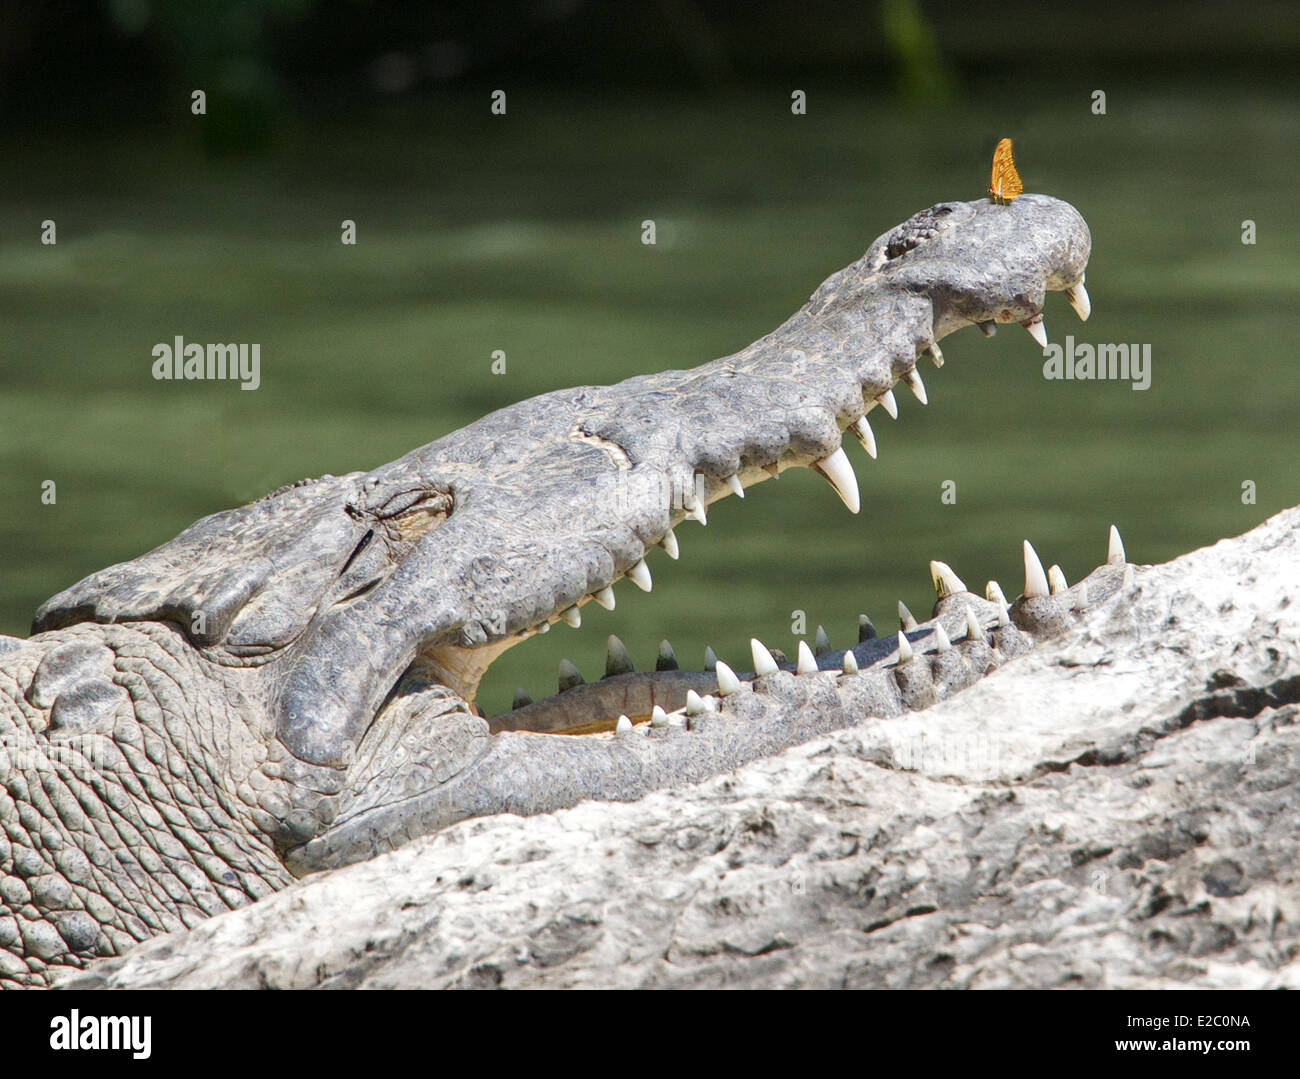 Crocodile with brave butterfly on snout Sumidero Canyon Chiapas Mexico Stock Photo